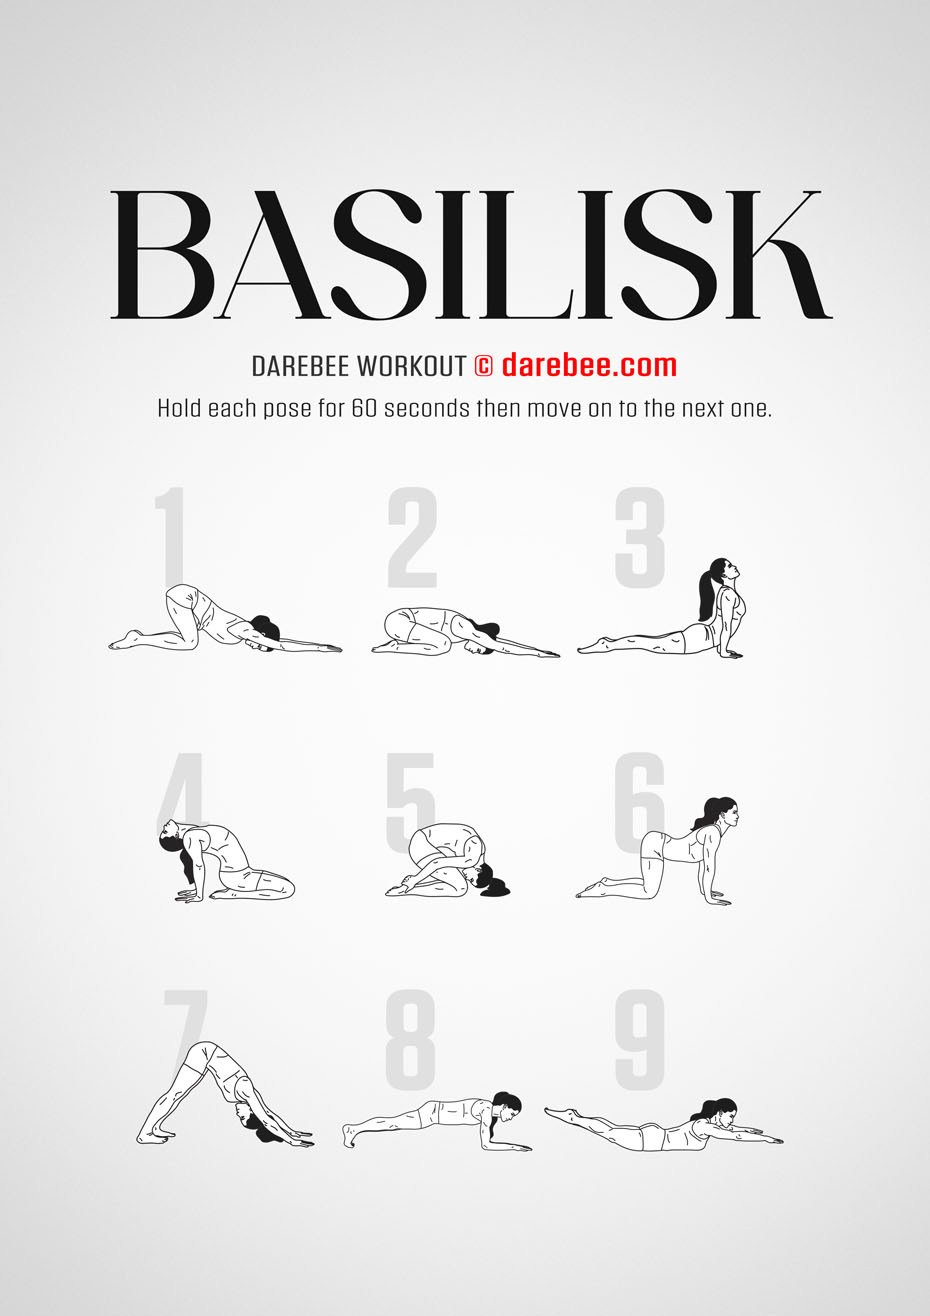 Basilisk is a DAREBEE home fitness yoga-based workout that helps you develop total body strength, flexibility and agility, all of which contribute to physical power.